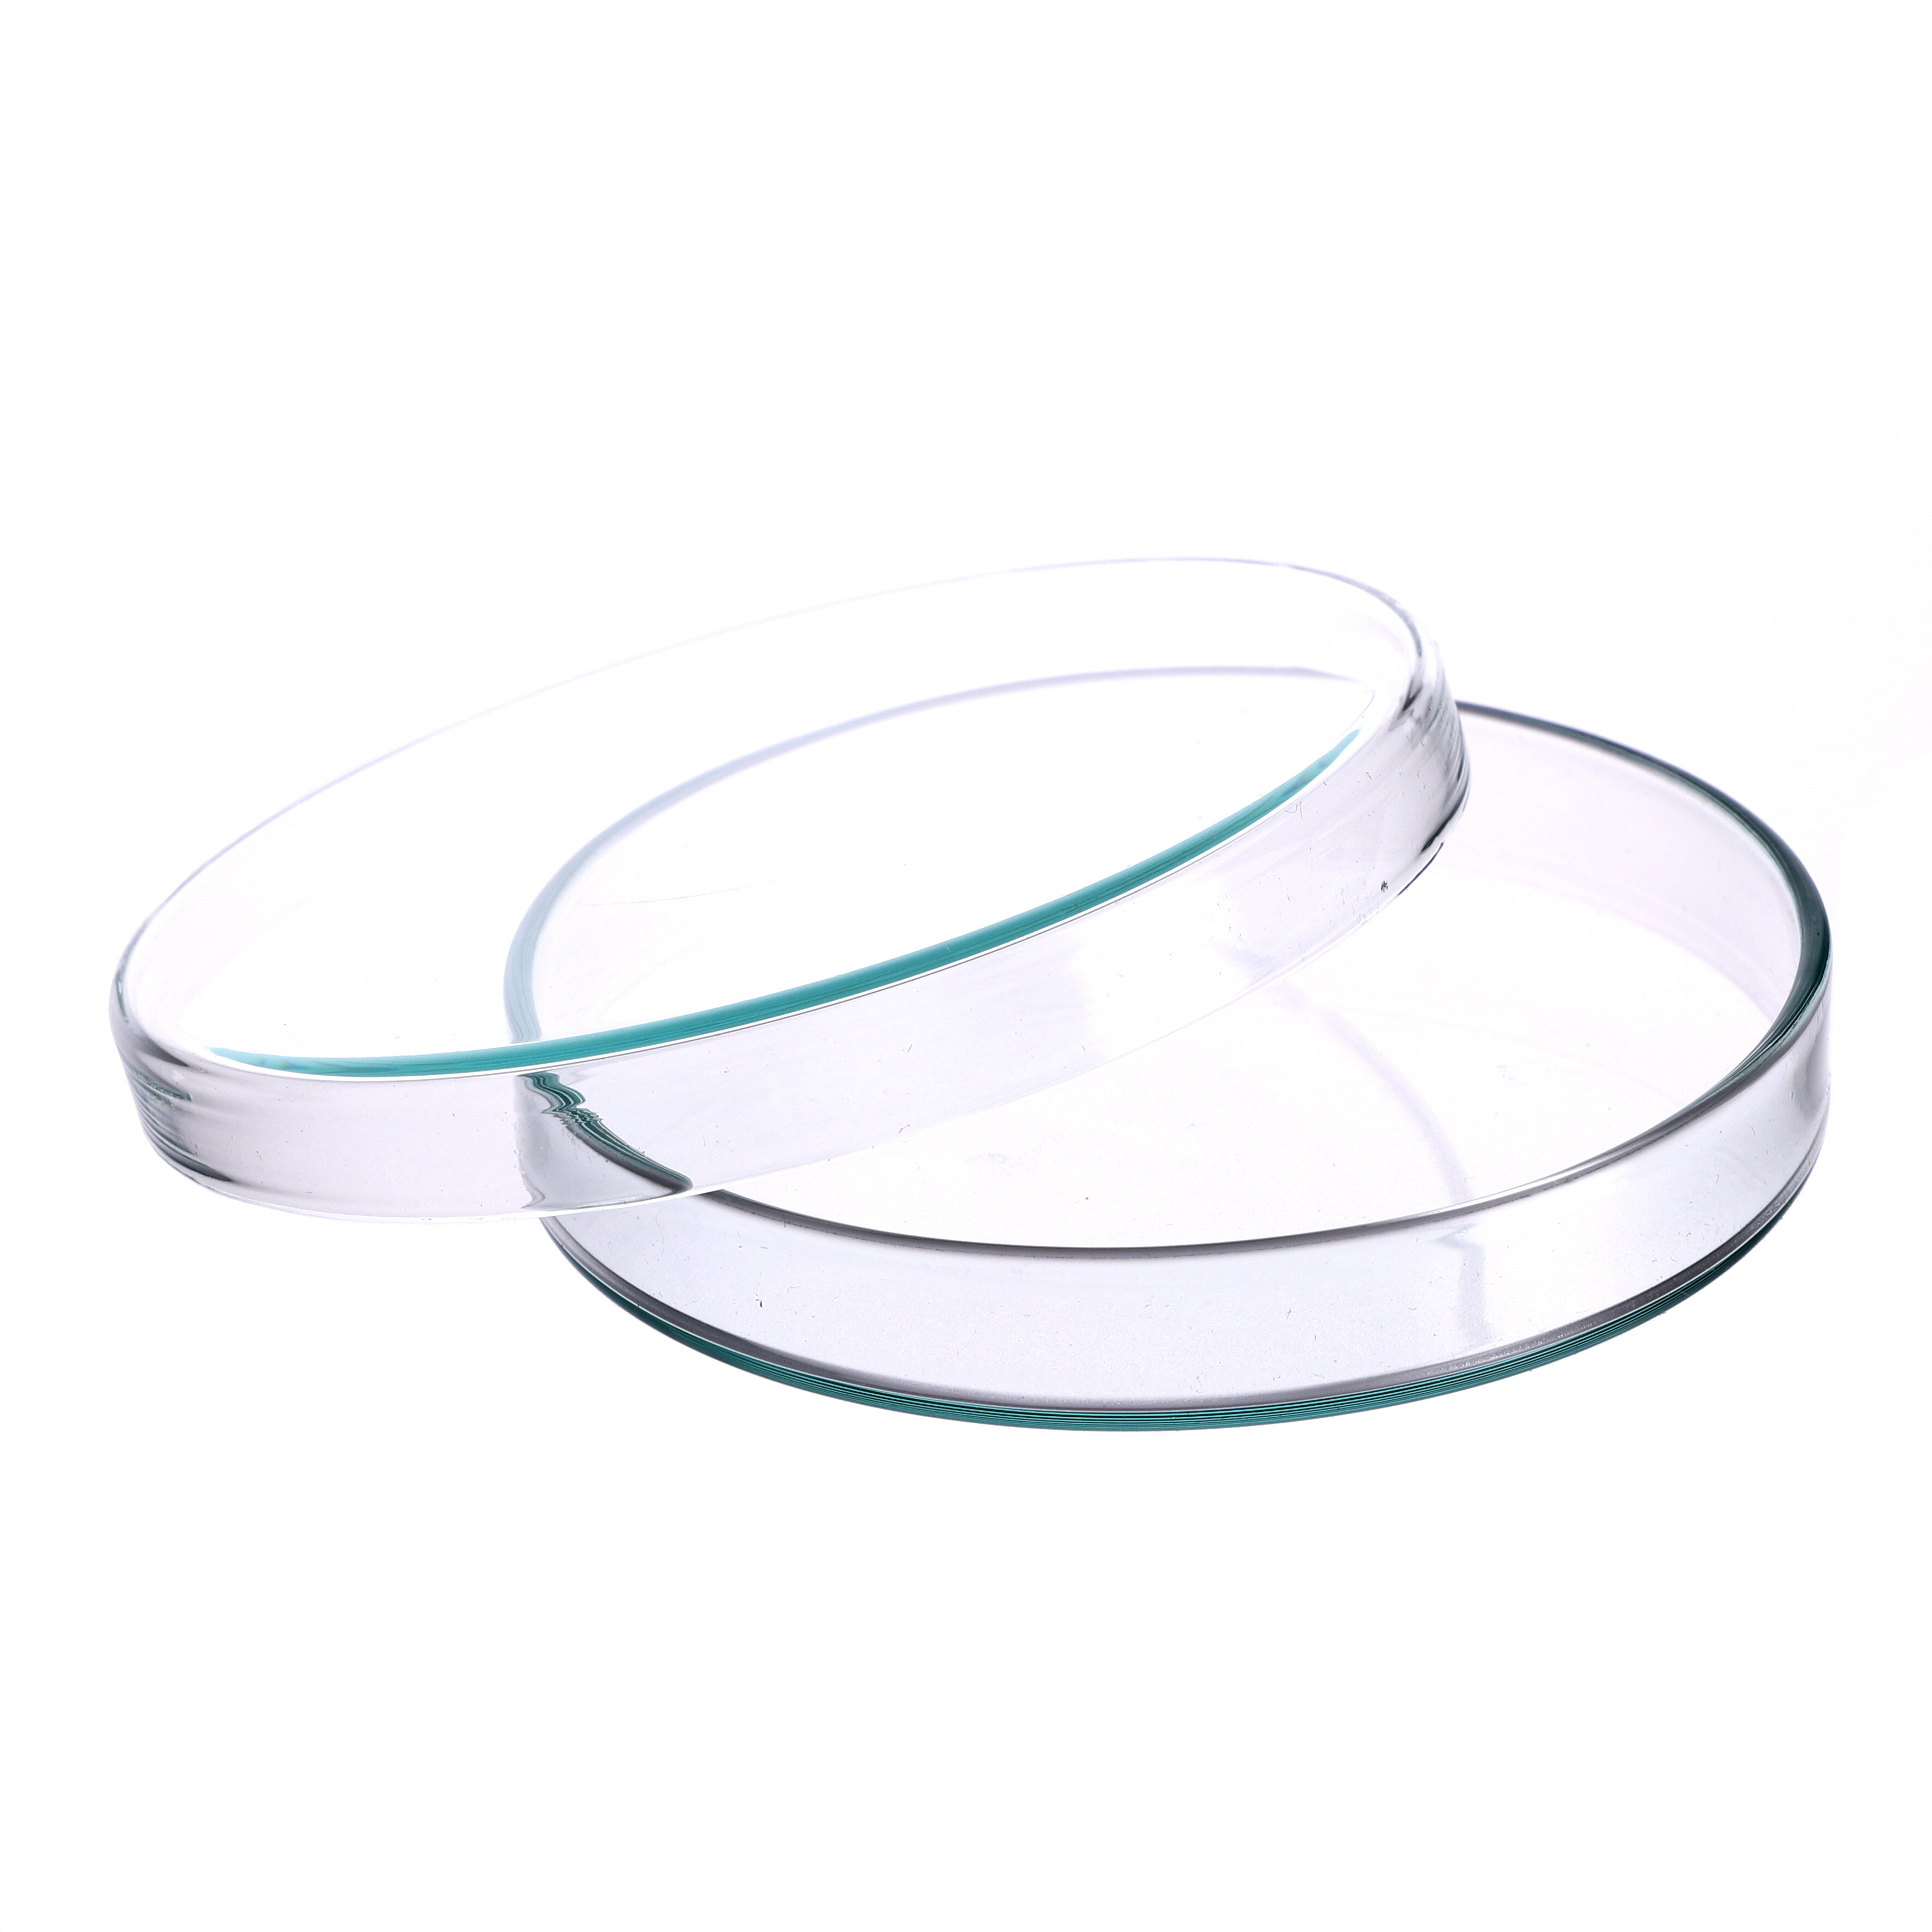 Karter Scientific Pack of 10 90mm Glass Petri Dish with Cover 